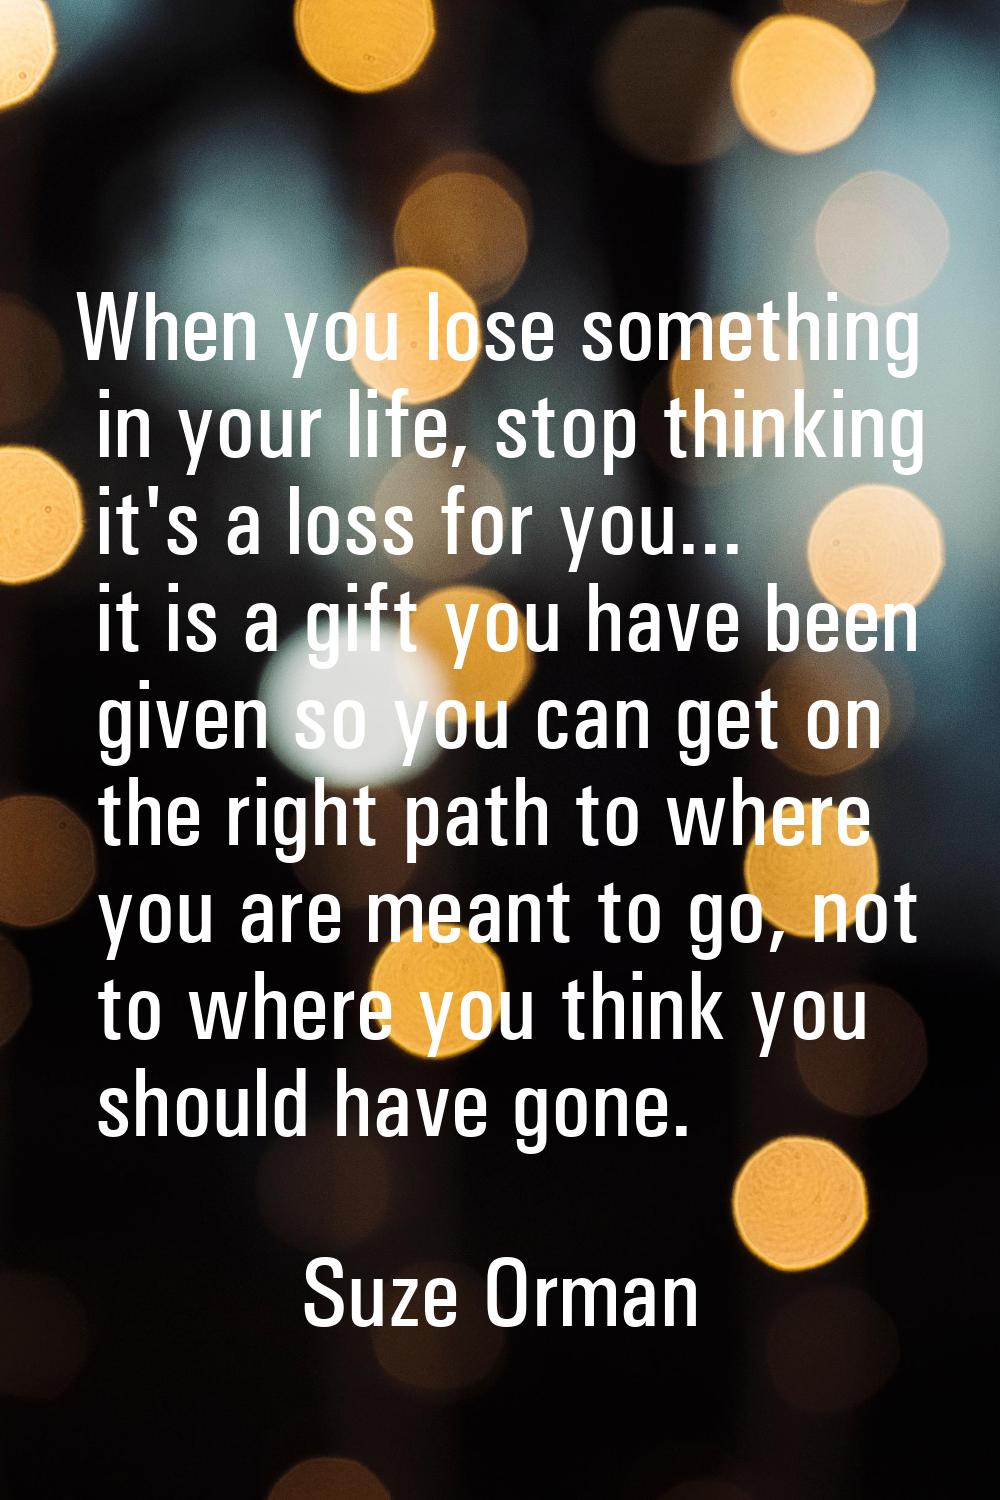 When you lose something in your life, stop thinking it's a loss for you... it is a gift you have be